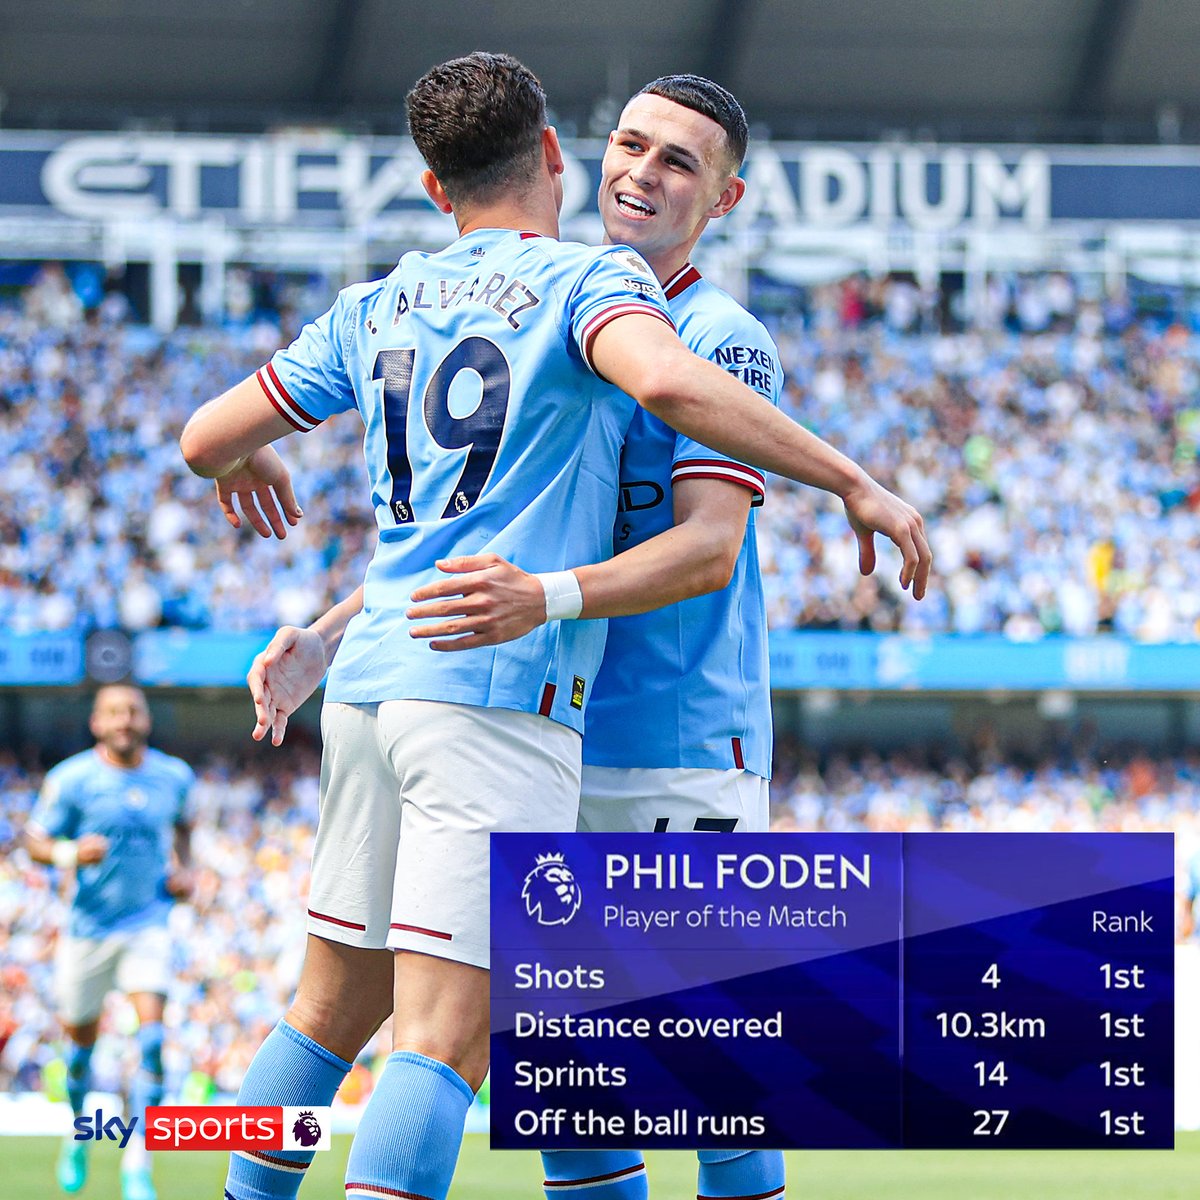 Phil Foden has been awarded Player of the Match 👏